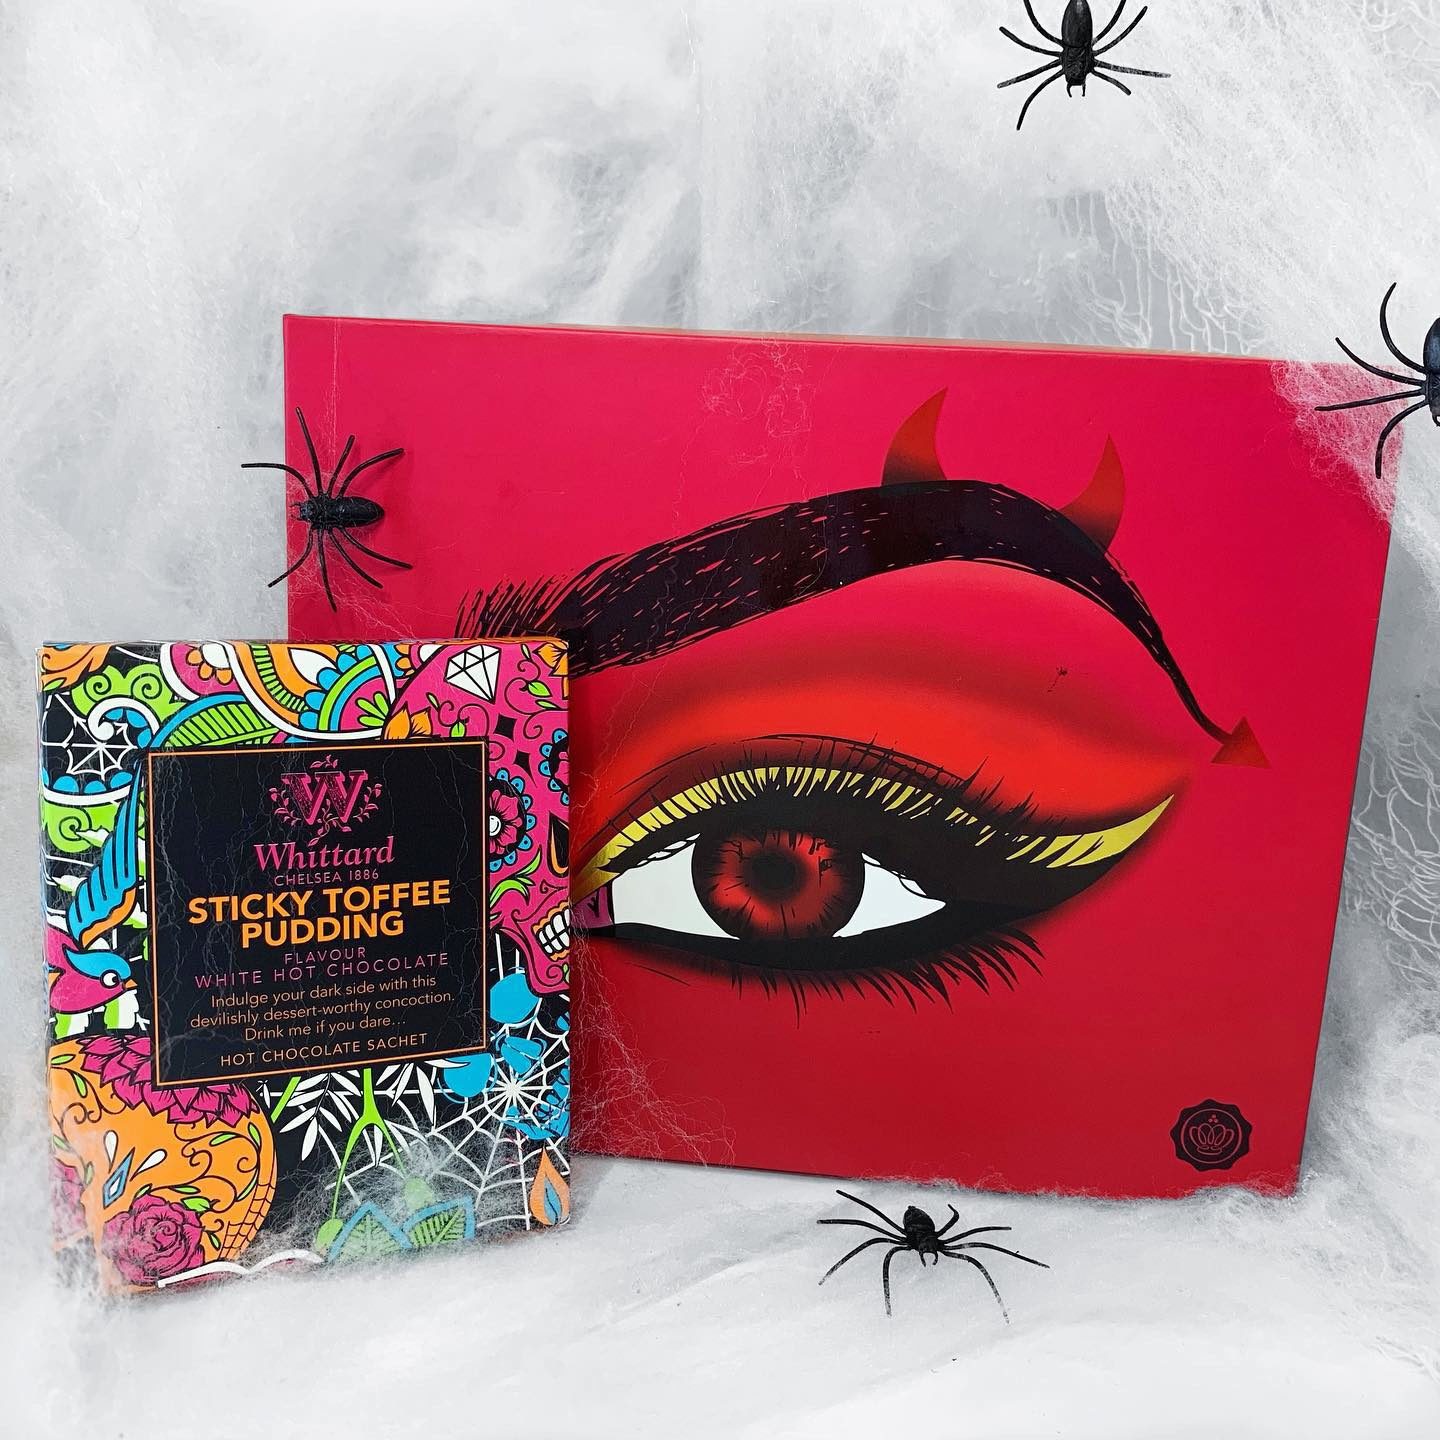 Whittard of Chelsea Sticky Toffee Pudding White Hot Chocolate - Glossybox Halloween Devil Edit October 2019 - Miss Boux